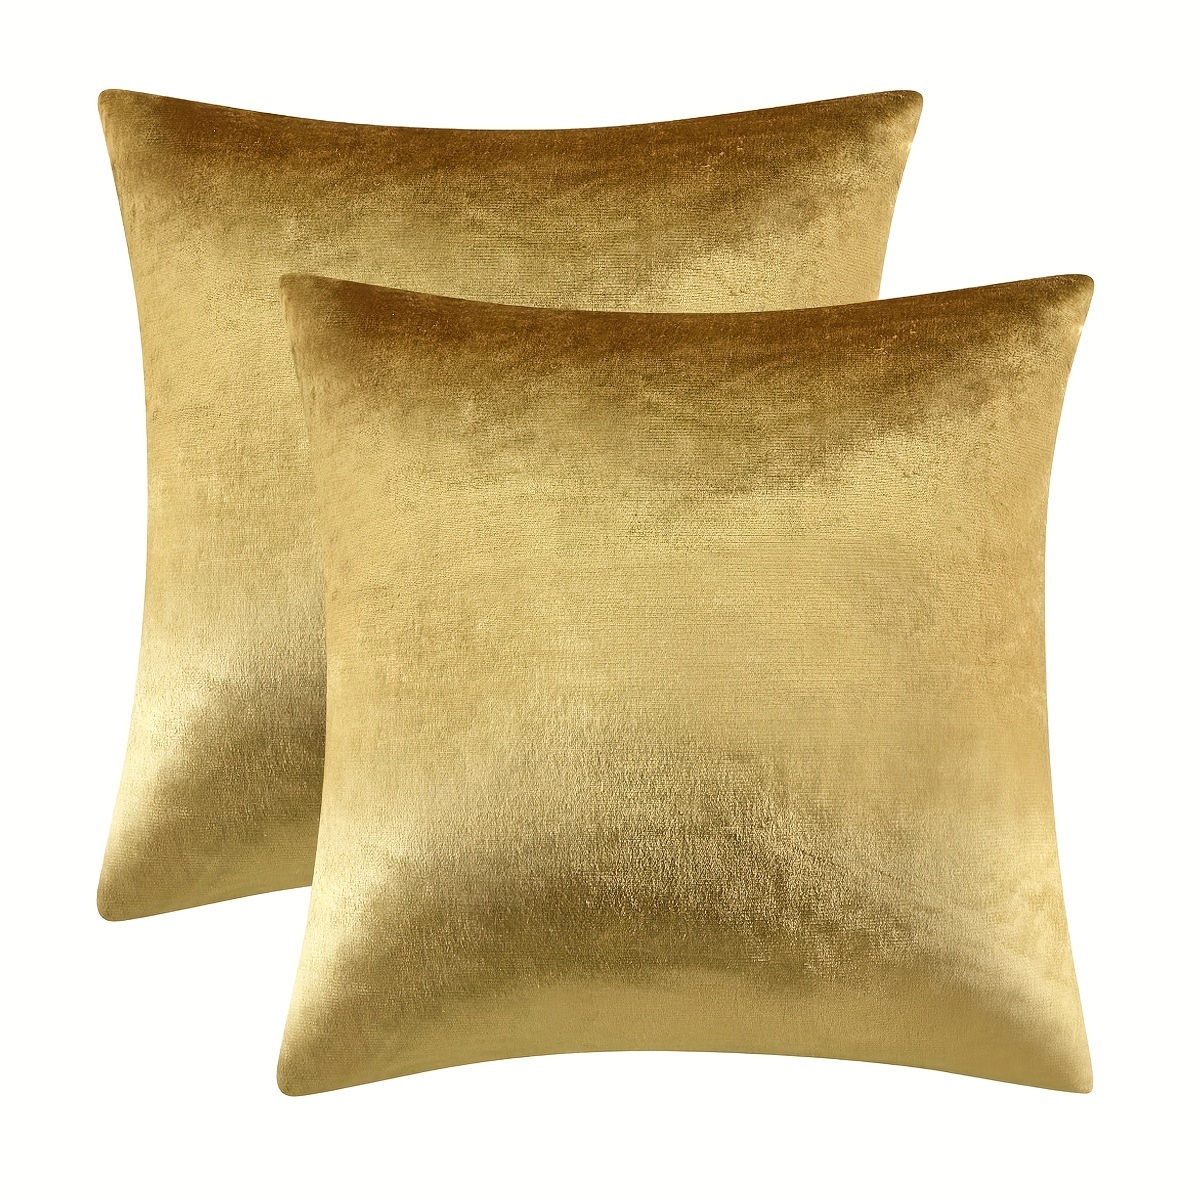 

2pcs Golden Velvet Decorative Throw Pillow Covers, 18x18 Soft Cushion Covers Pillow Covers For Sofa Couch Home Decor, Room Decor, Office Decor, Living Room Decor (no Pillow Core)